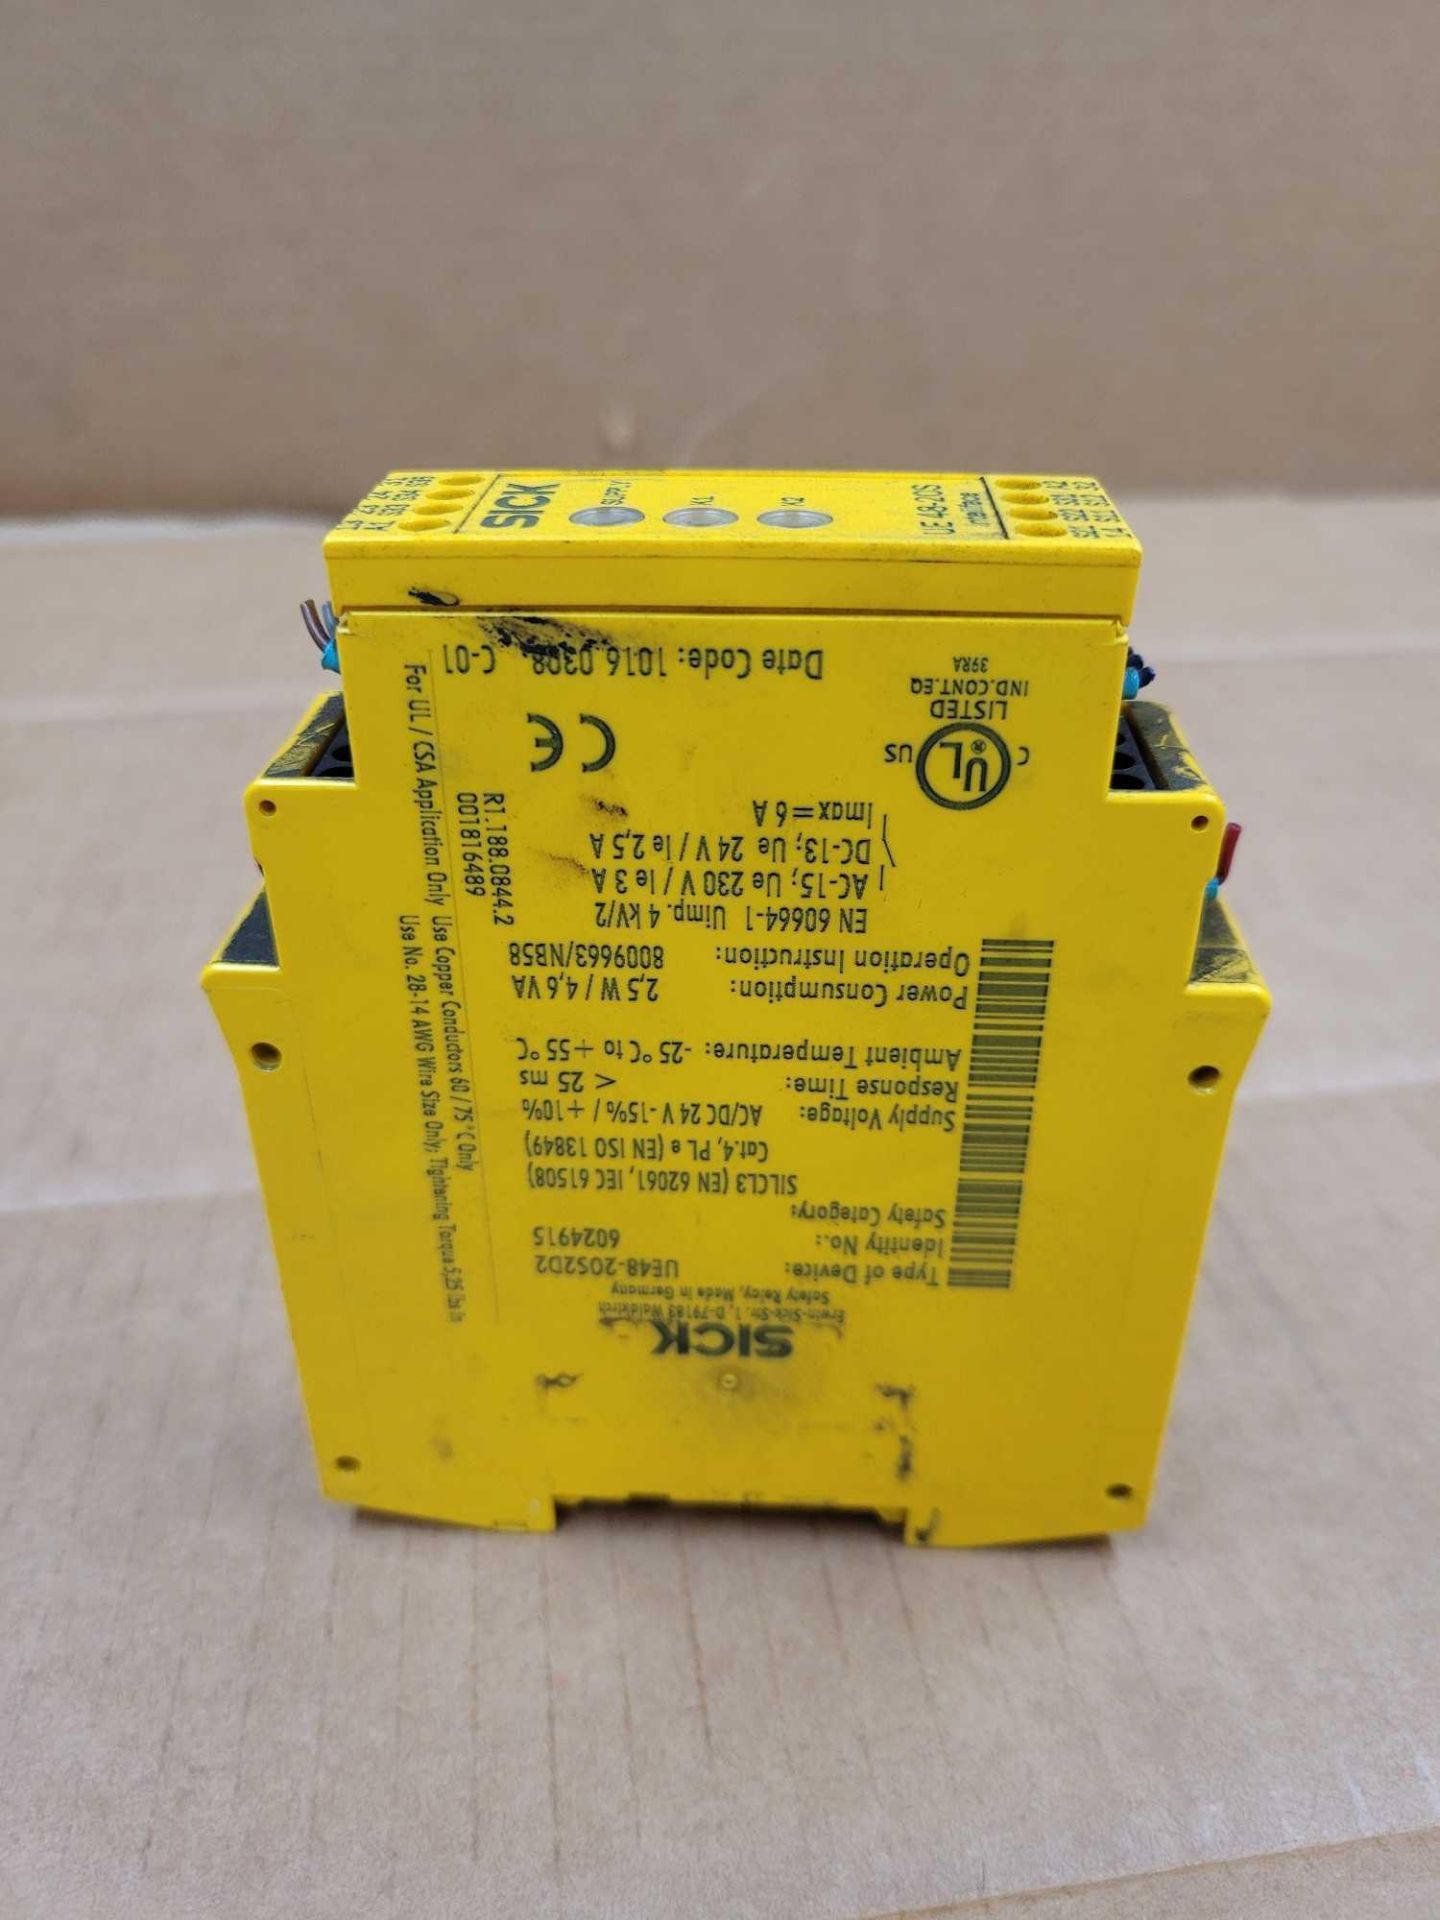 LOT OF 5 SICK UE48-20S2D2 / Safety Relay  /  Lot Weight: 2.4 lbs - Image 5 of 8